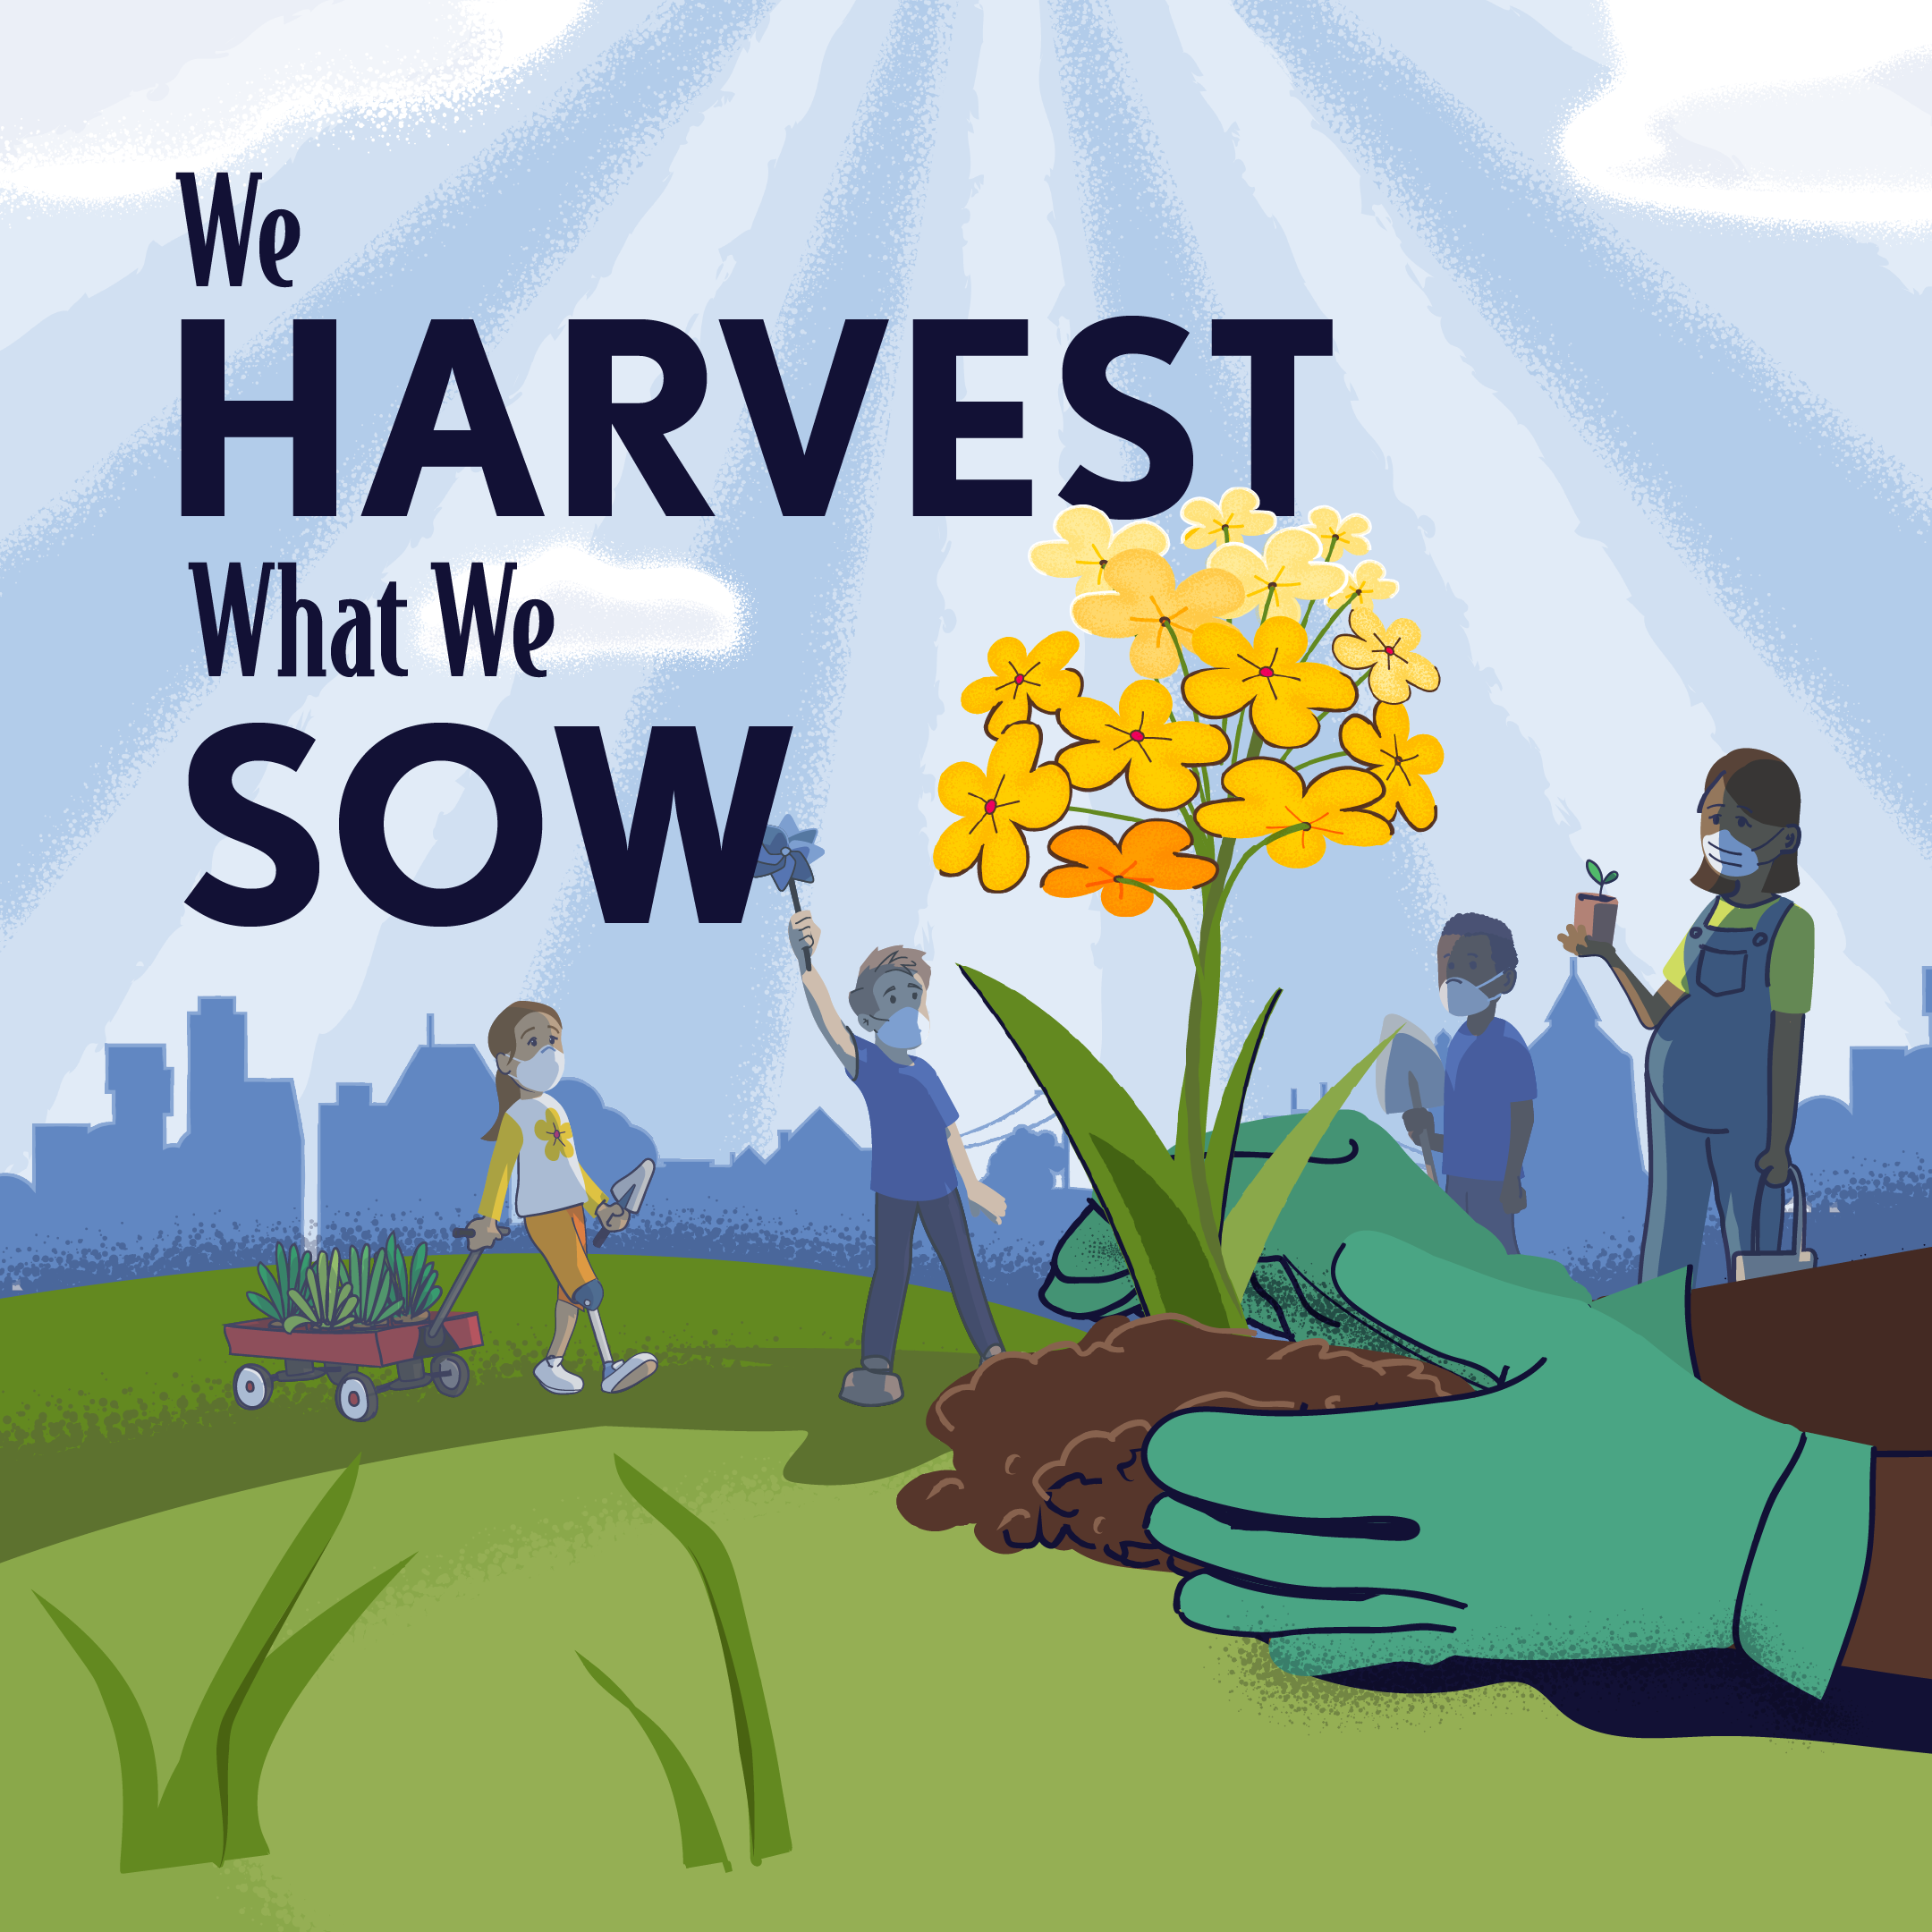 We harvest what we sow